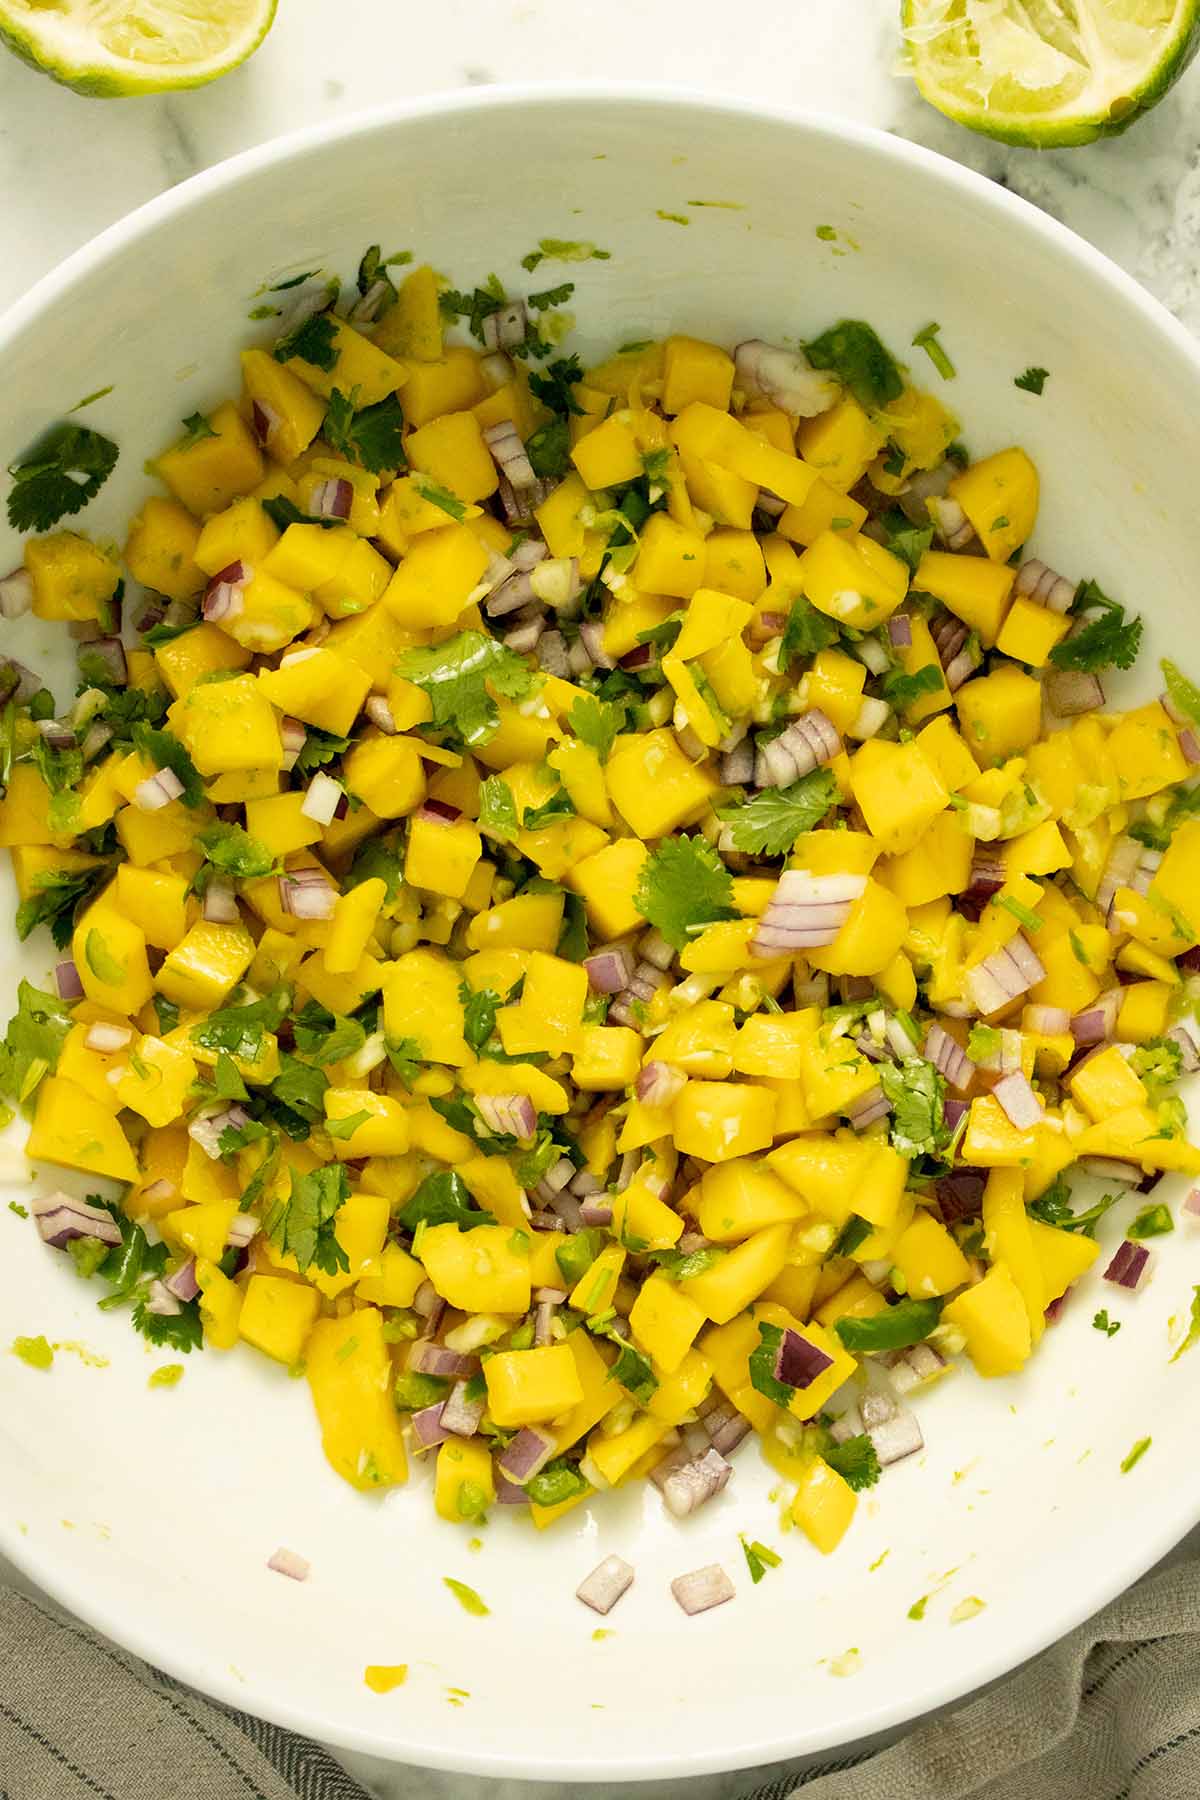 mango salsa, all mixed up in the mixing bowl